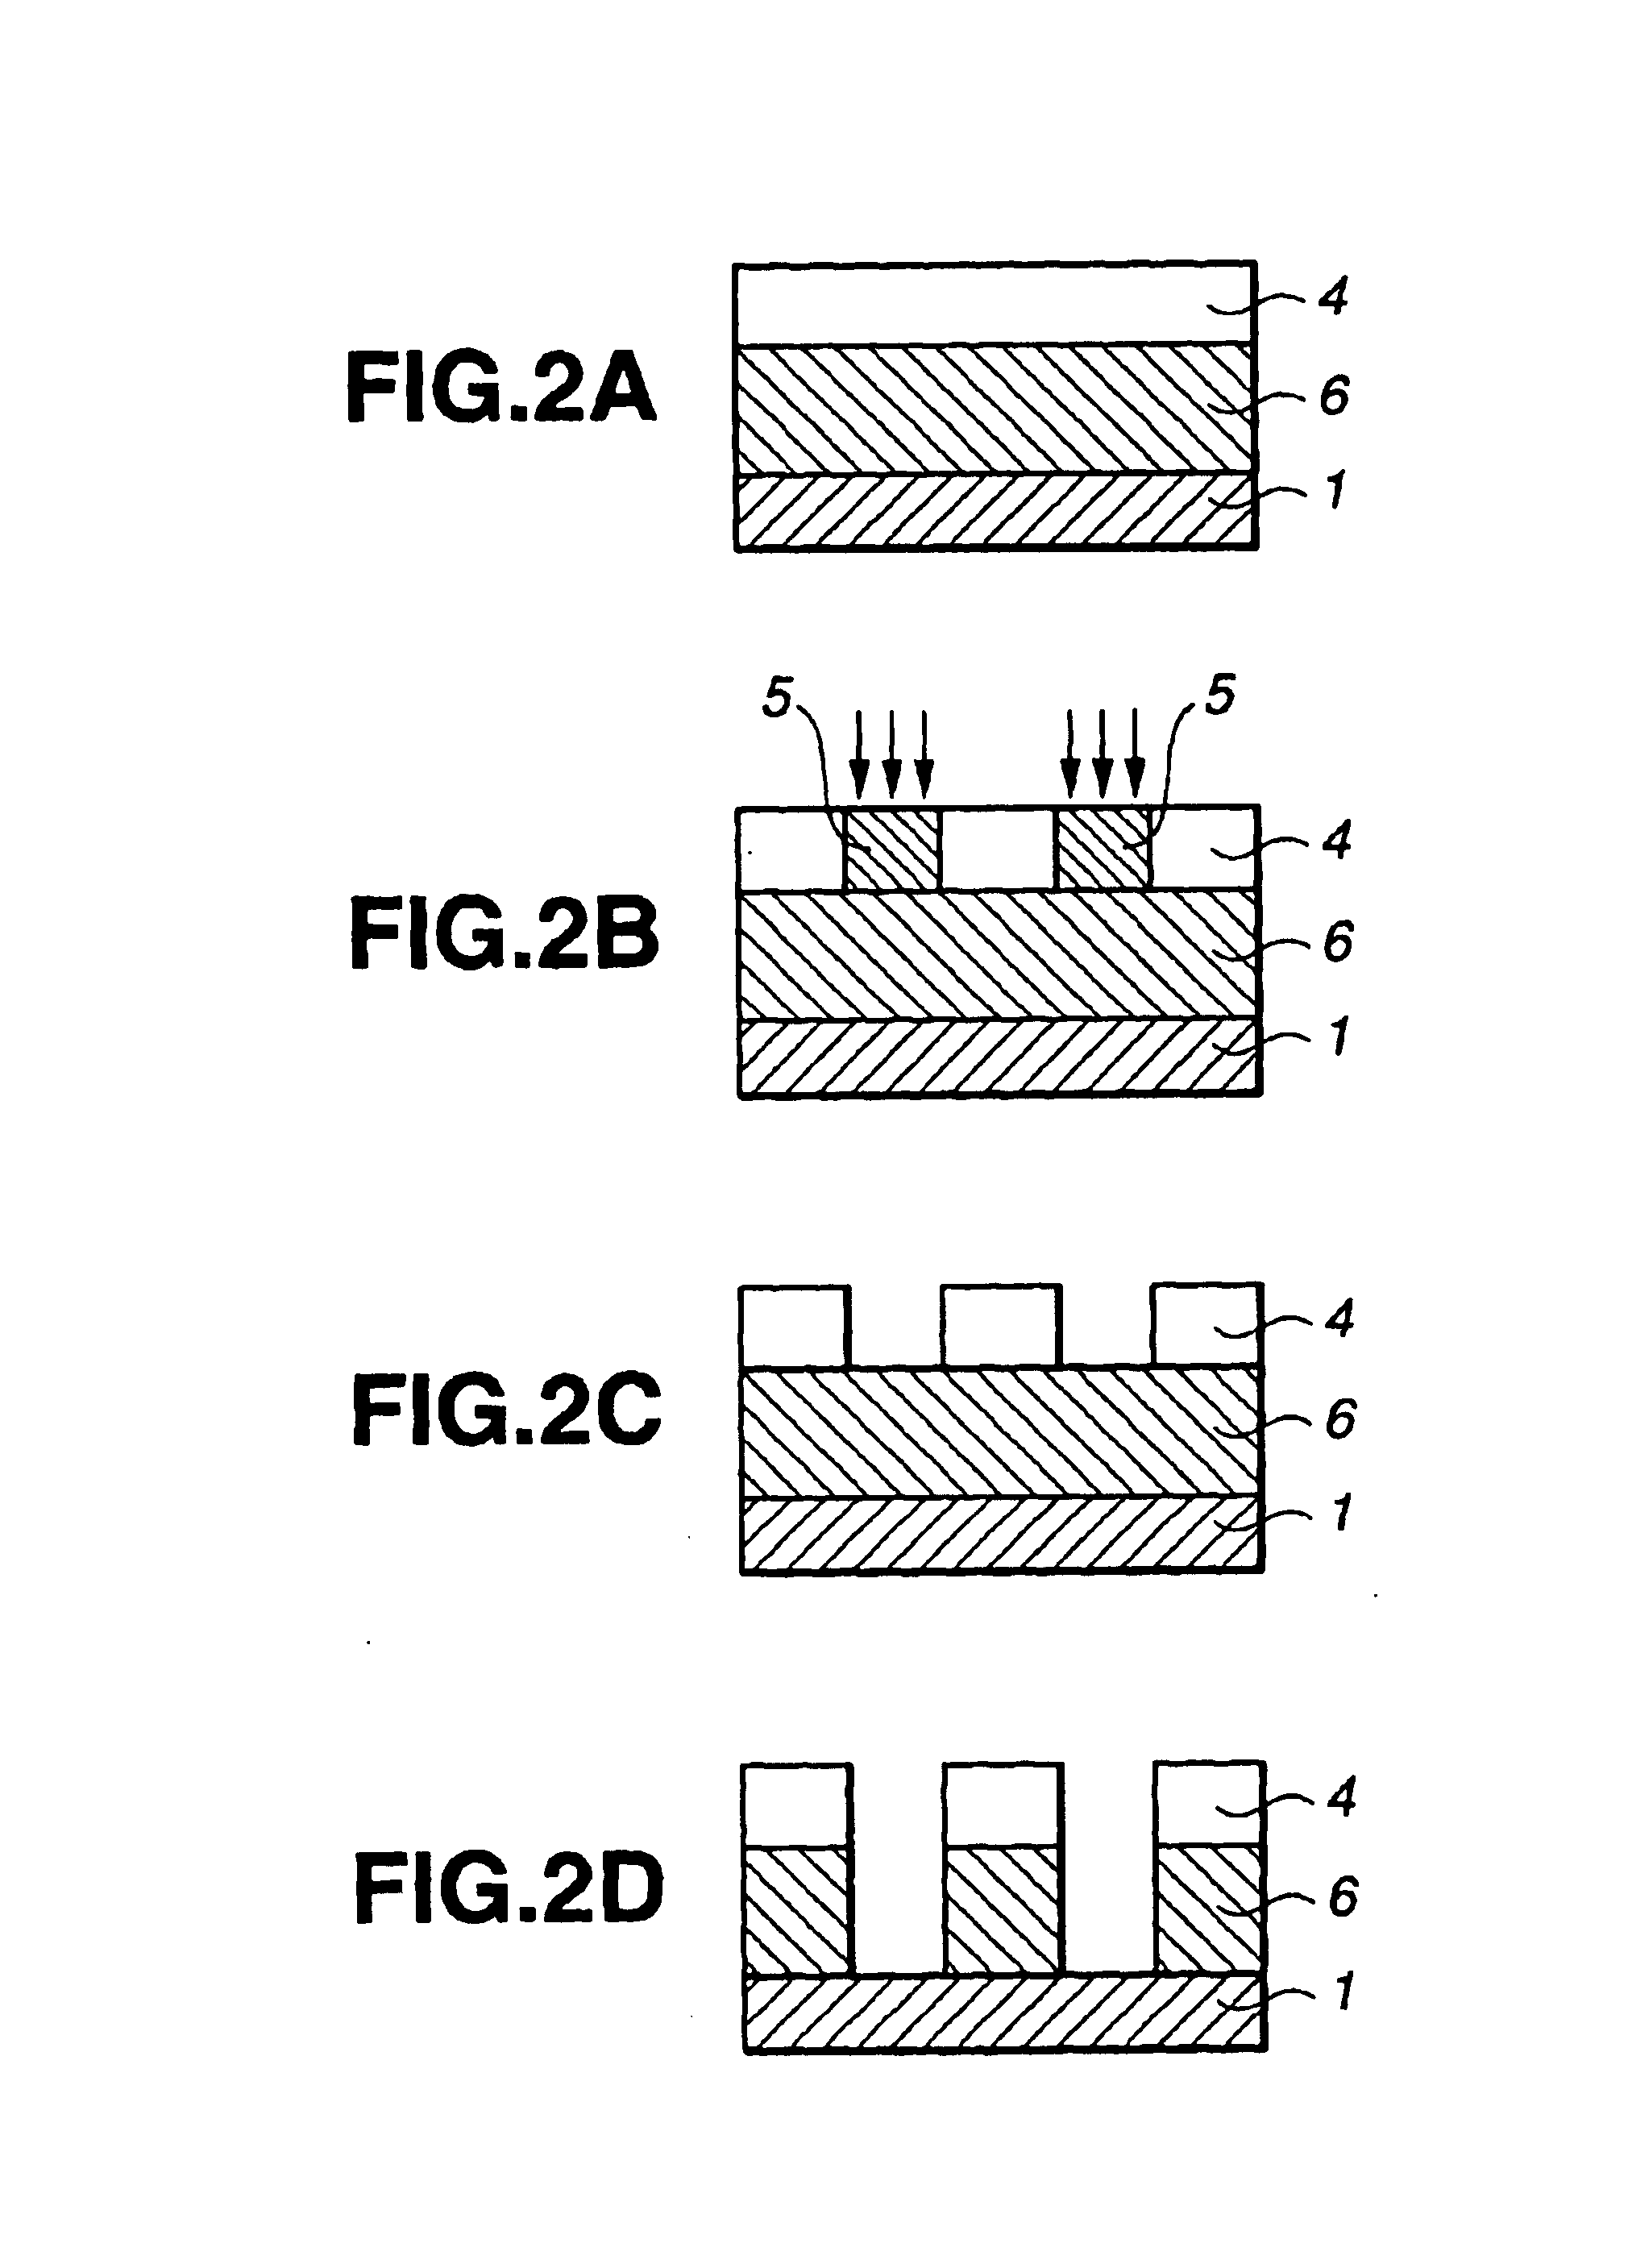 Silicon-containing polymer, resist composition and patterning process